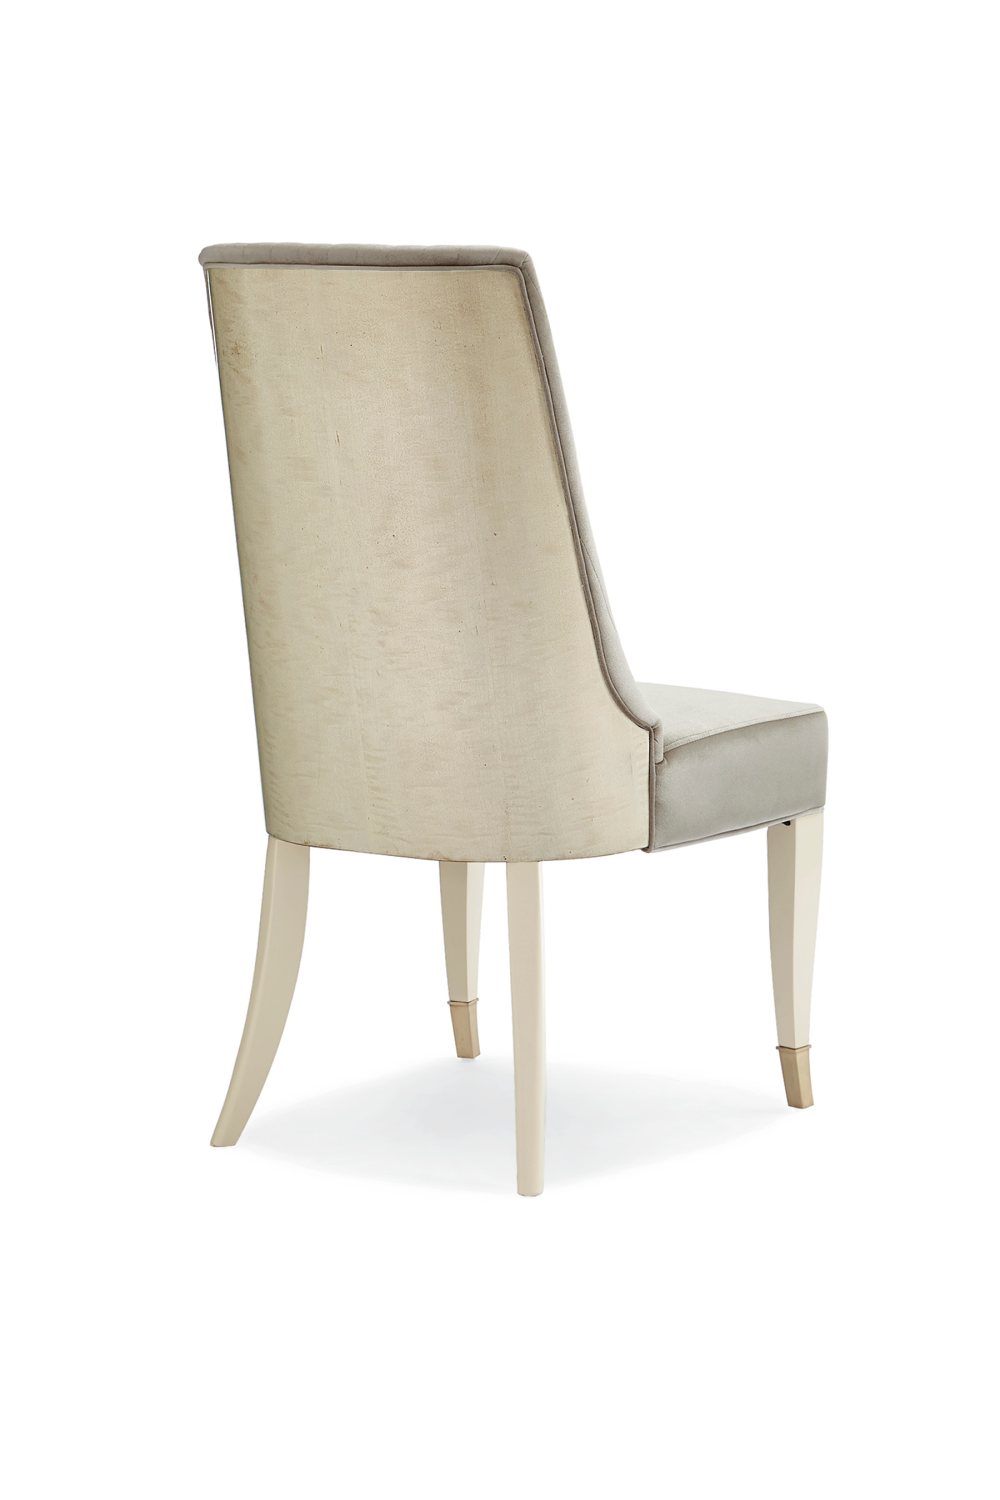 Tailored Modern Dining Chair | Caracole Line Me Up | Oroa.com